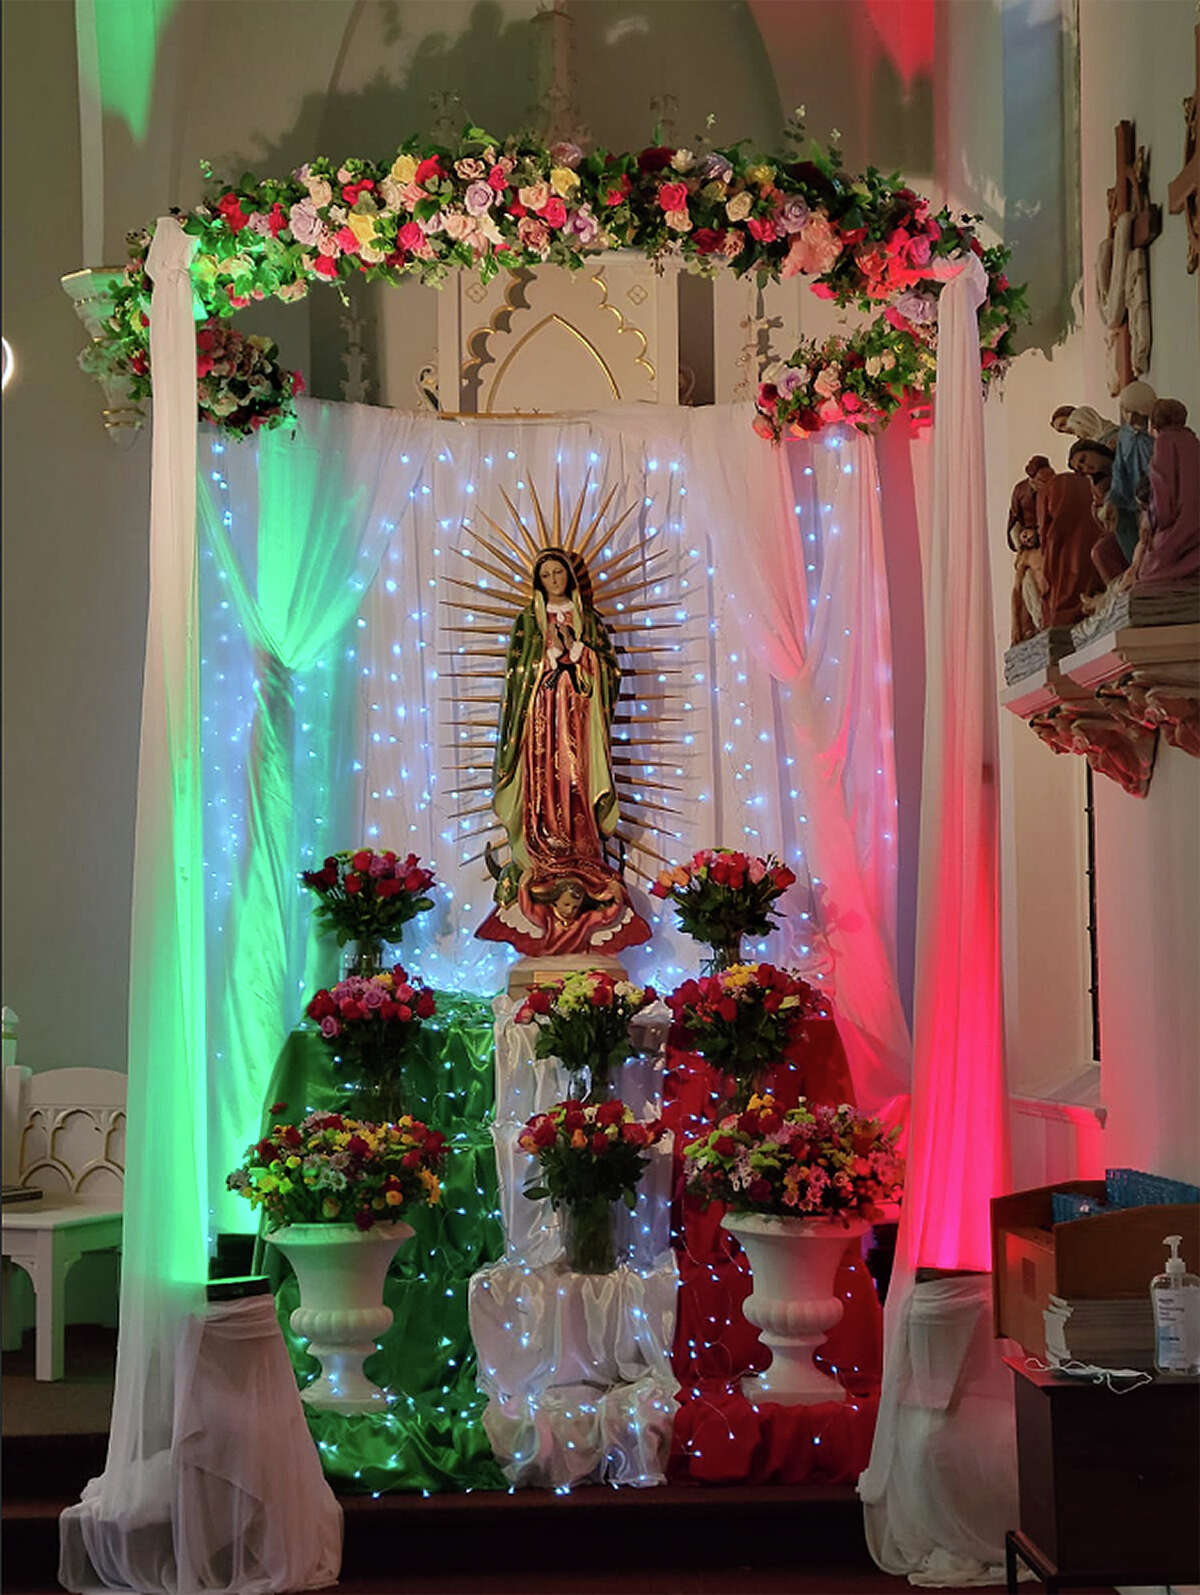 The Hispanic community of St. Alexius Catholic Church in Beardstown, under the direction of Avela Rodriguez and Vianney Torres, decorated an altar for the celebration of the Feast of Our Lady of Guadalupe on Sunday. 